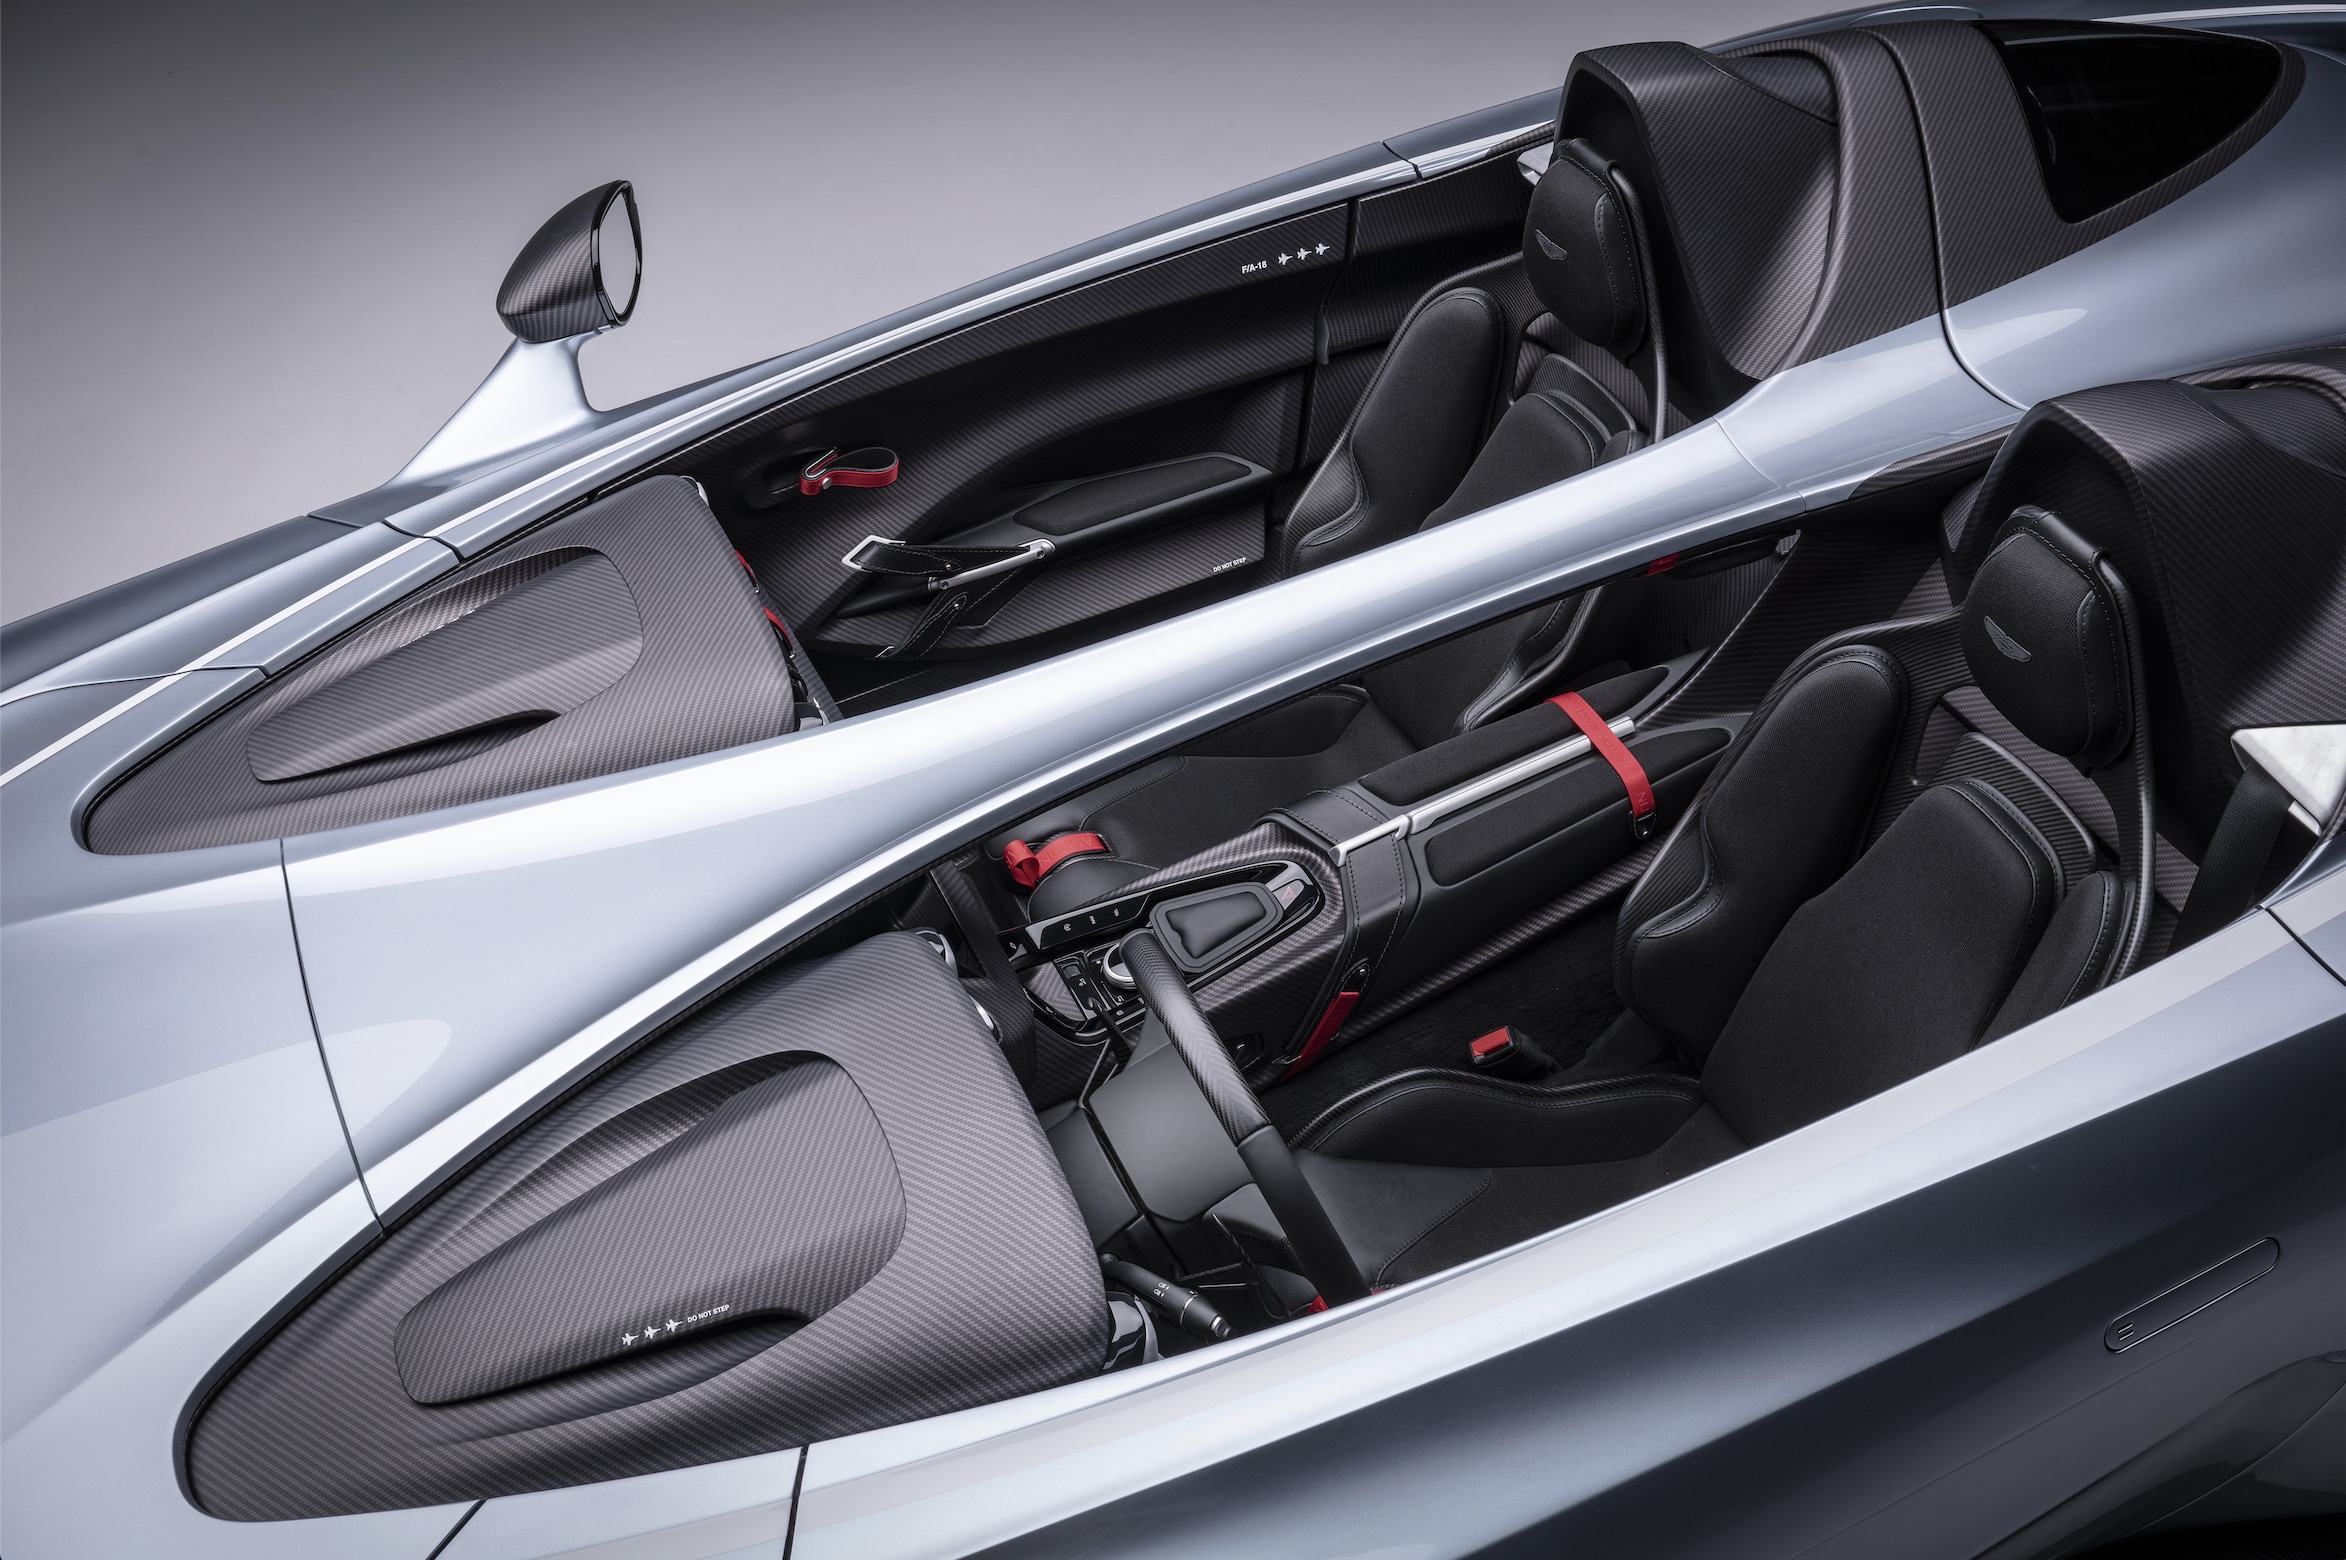 The V12 Speedster has been shown in a conceptual specification that is inspired by the legendary F/A-18 fighter jet